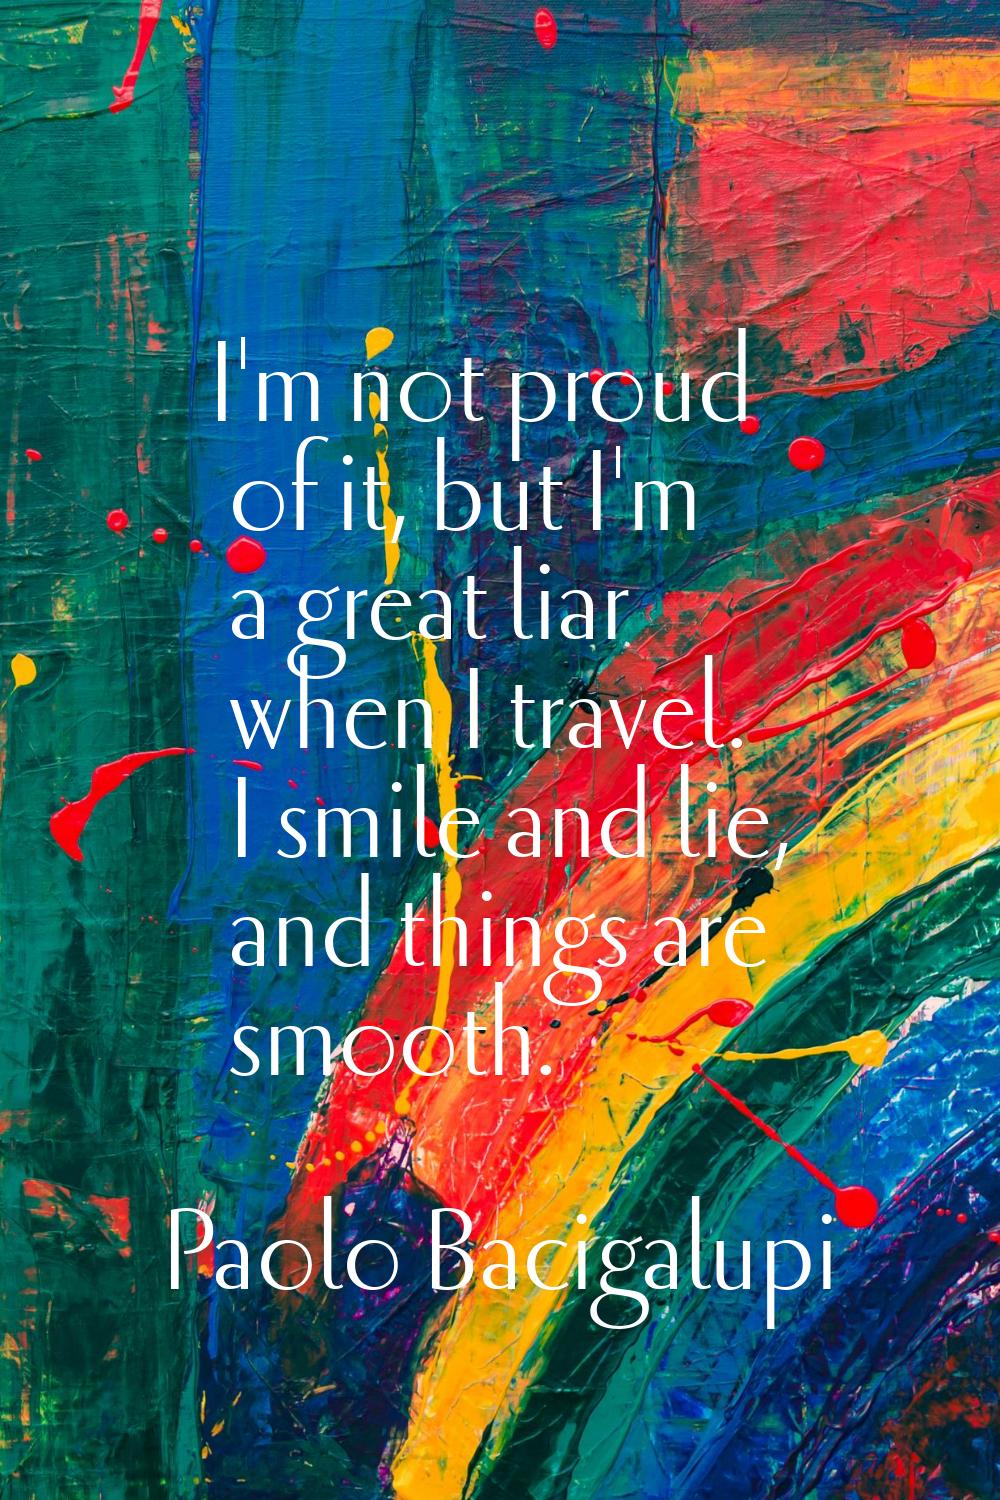 I'm not proud of it, but I'm a great liar when I travel. I smile and lie, and things are smooth.